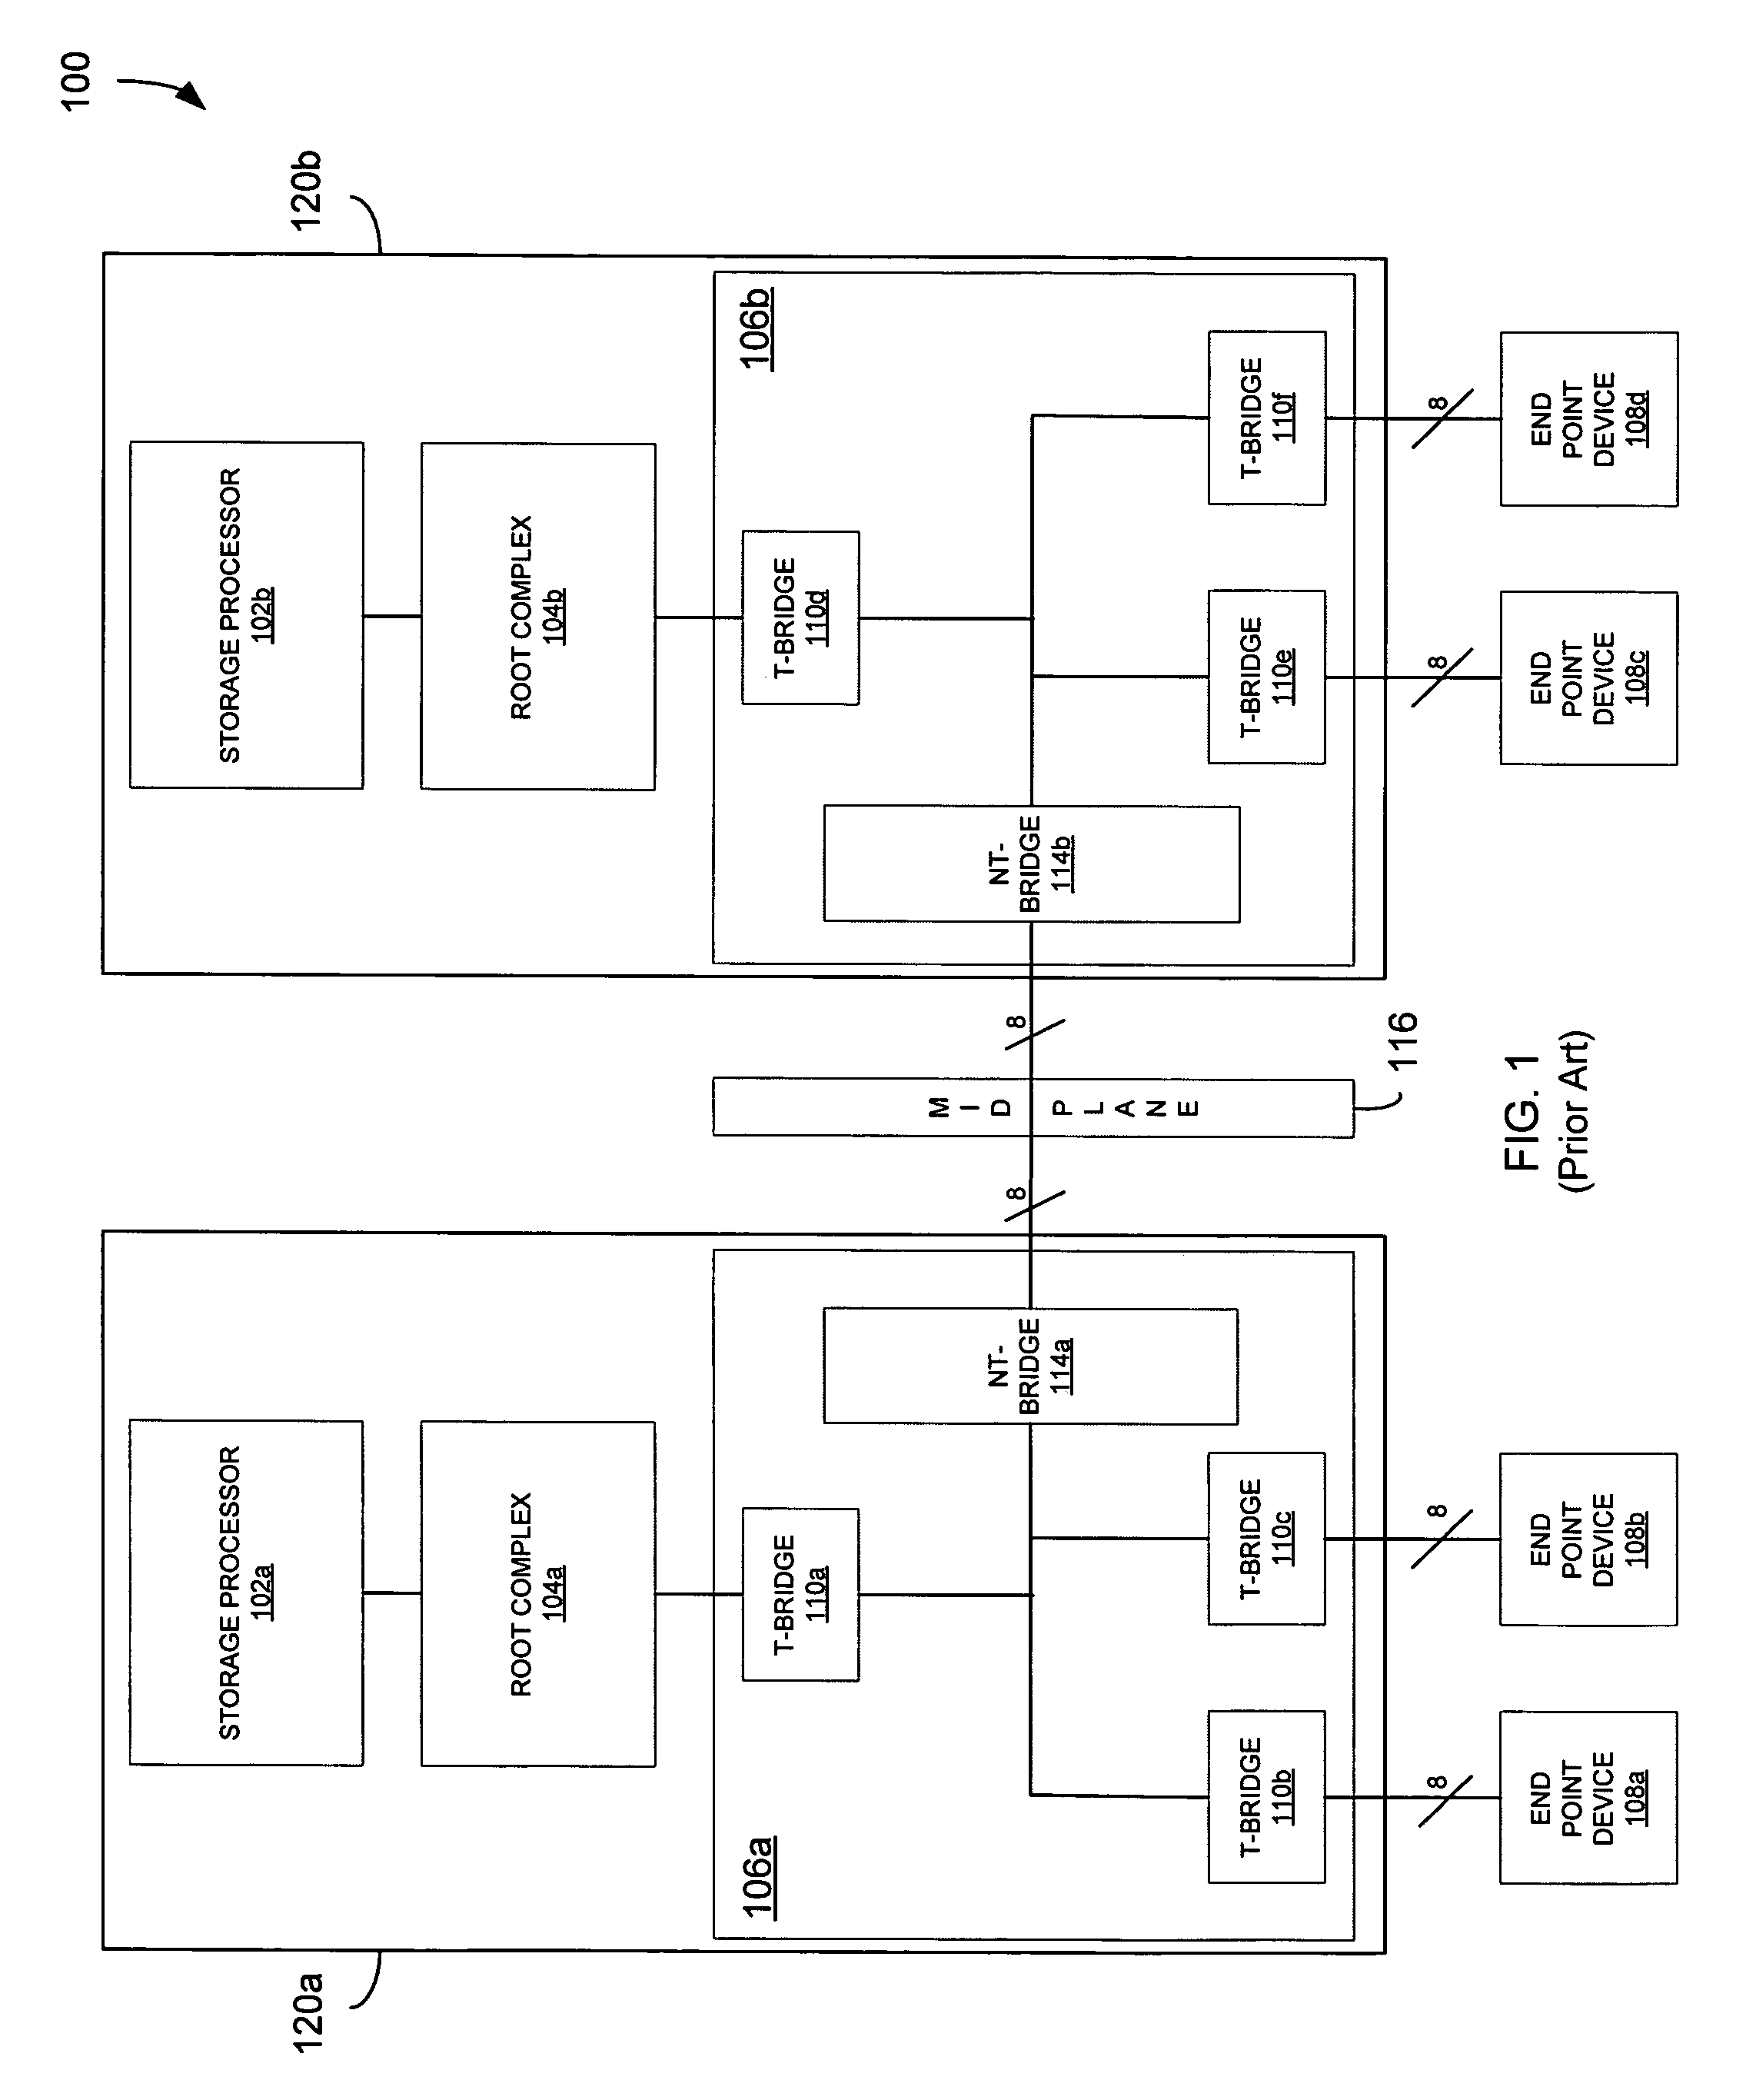 Root complex connection system